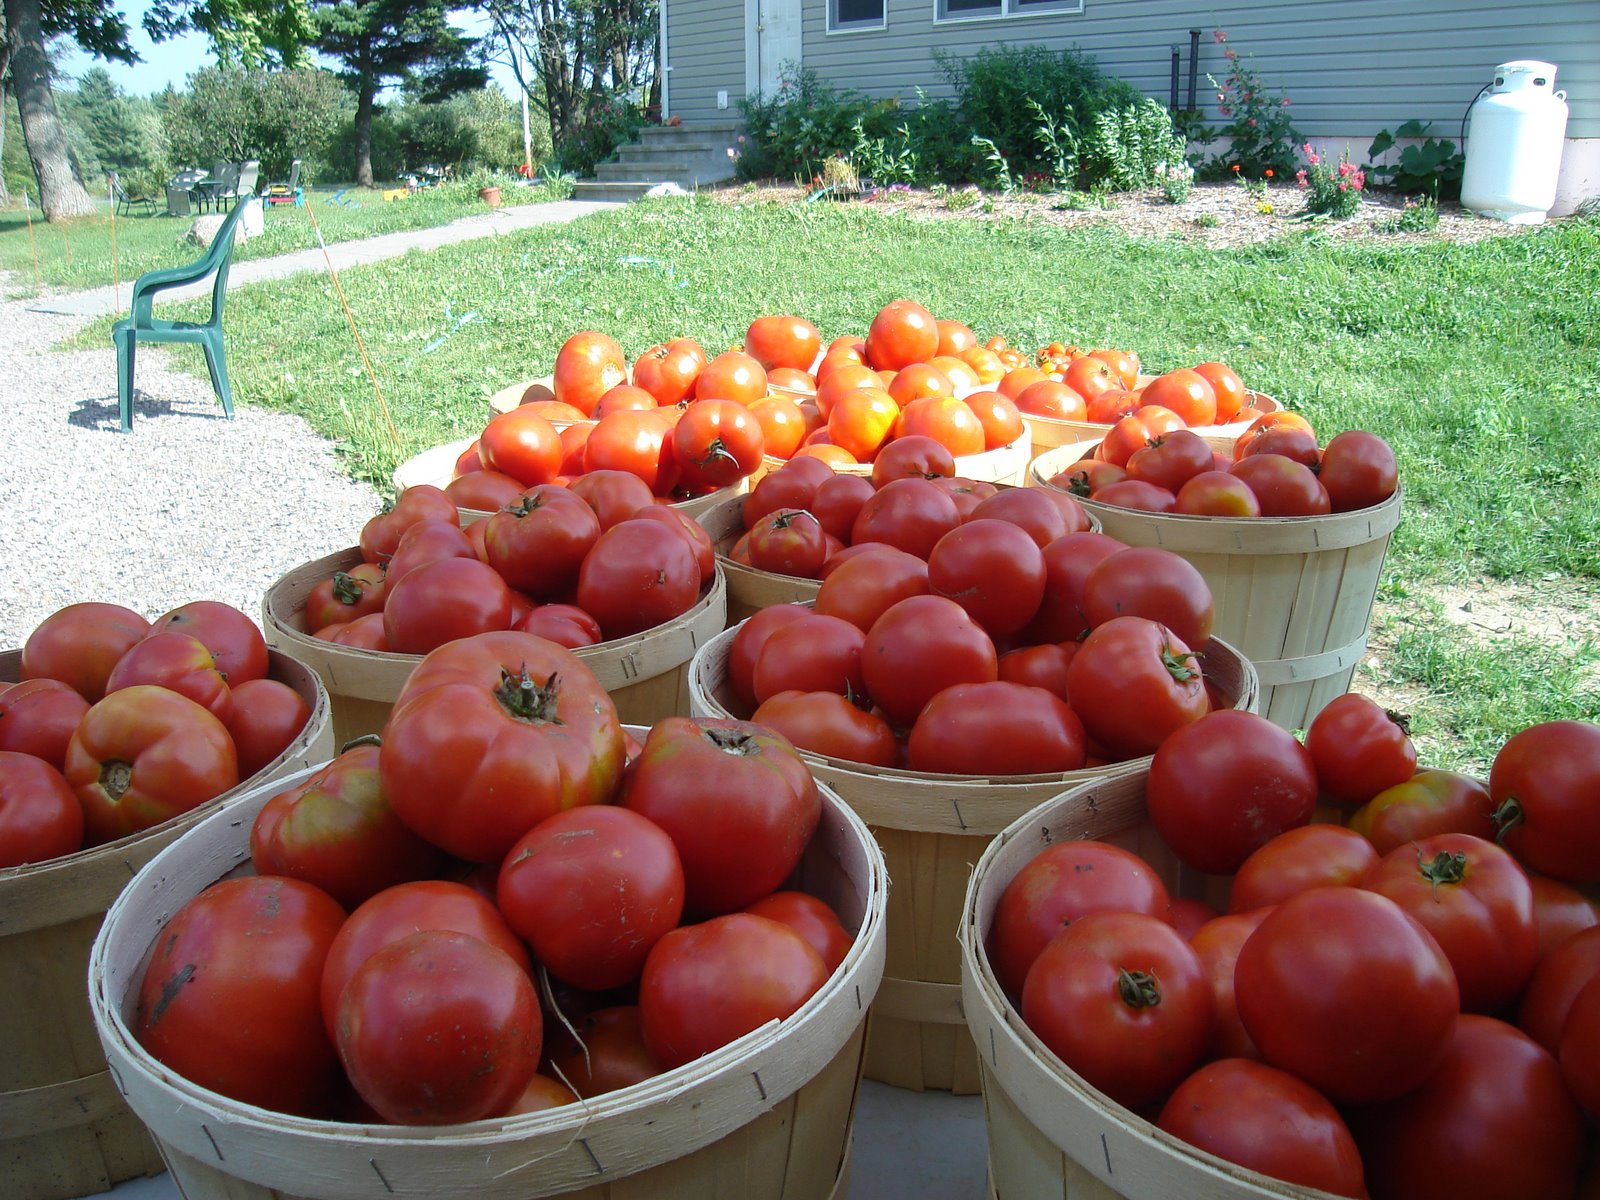 More tomatoes